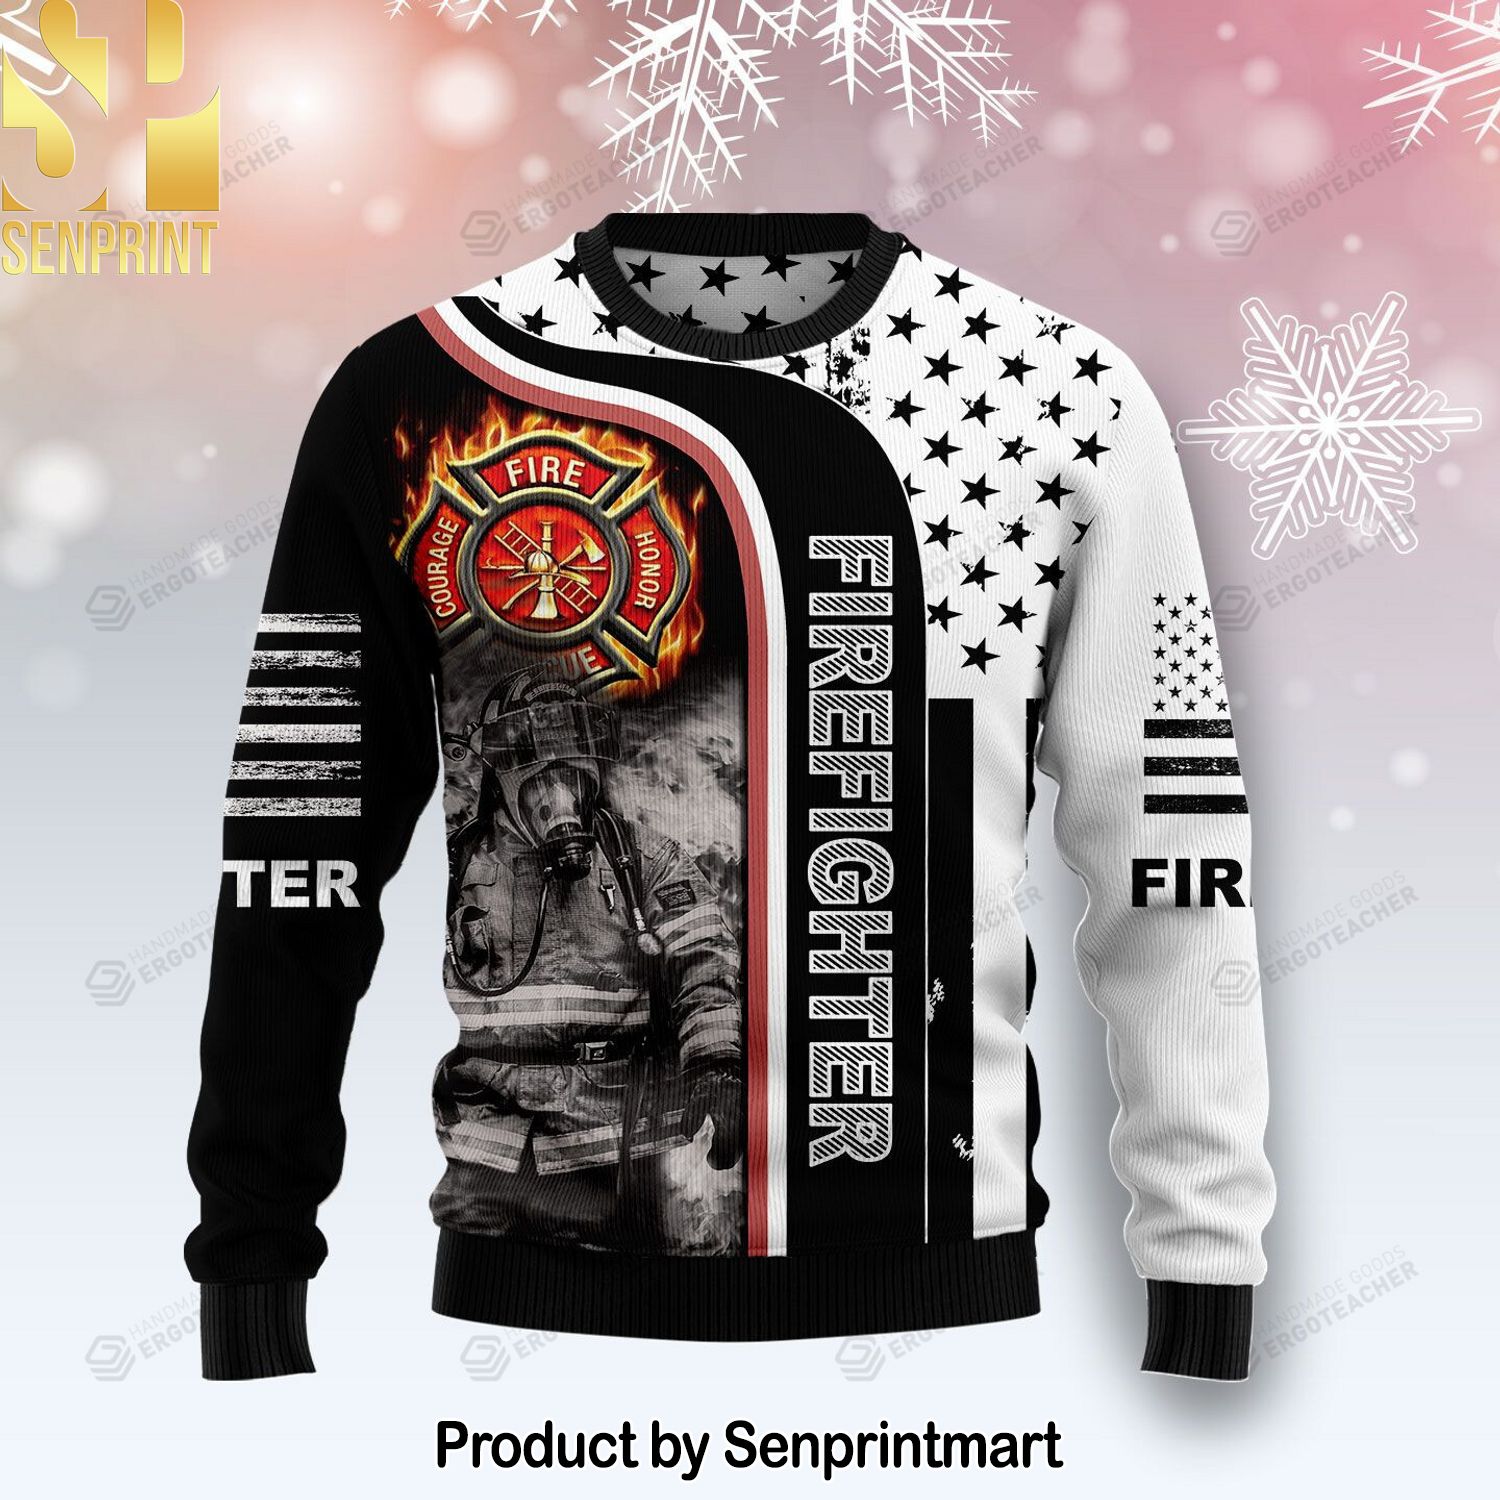 Firefighter Awesome For Christmas Gifts Knitting Pattern Sweater